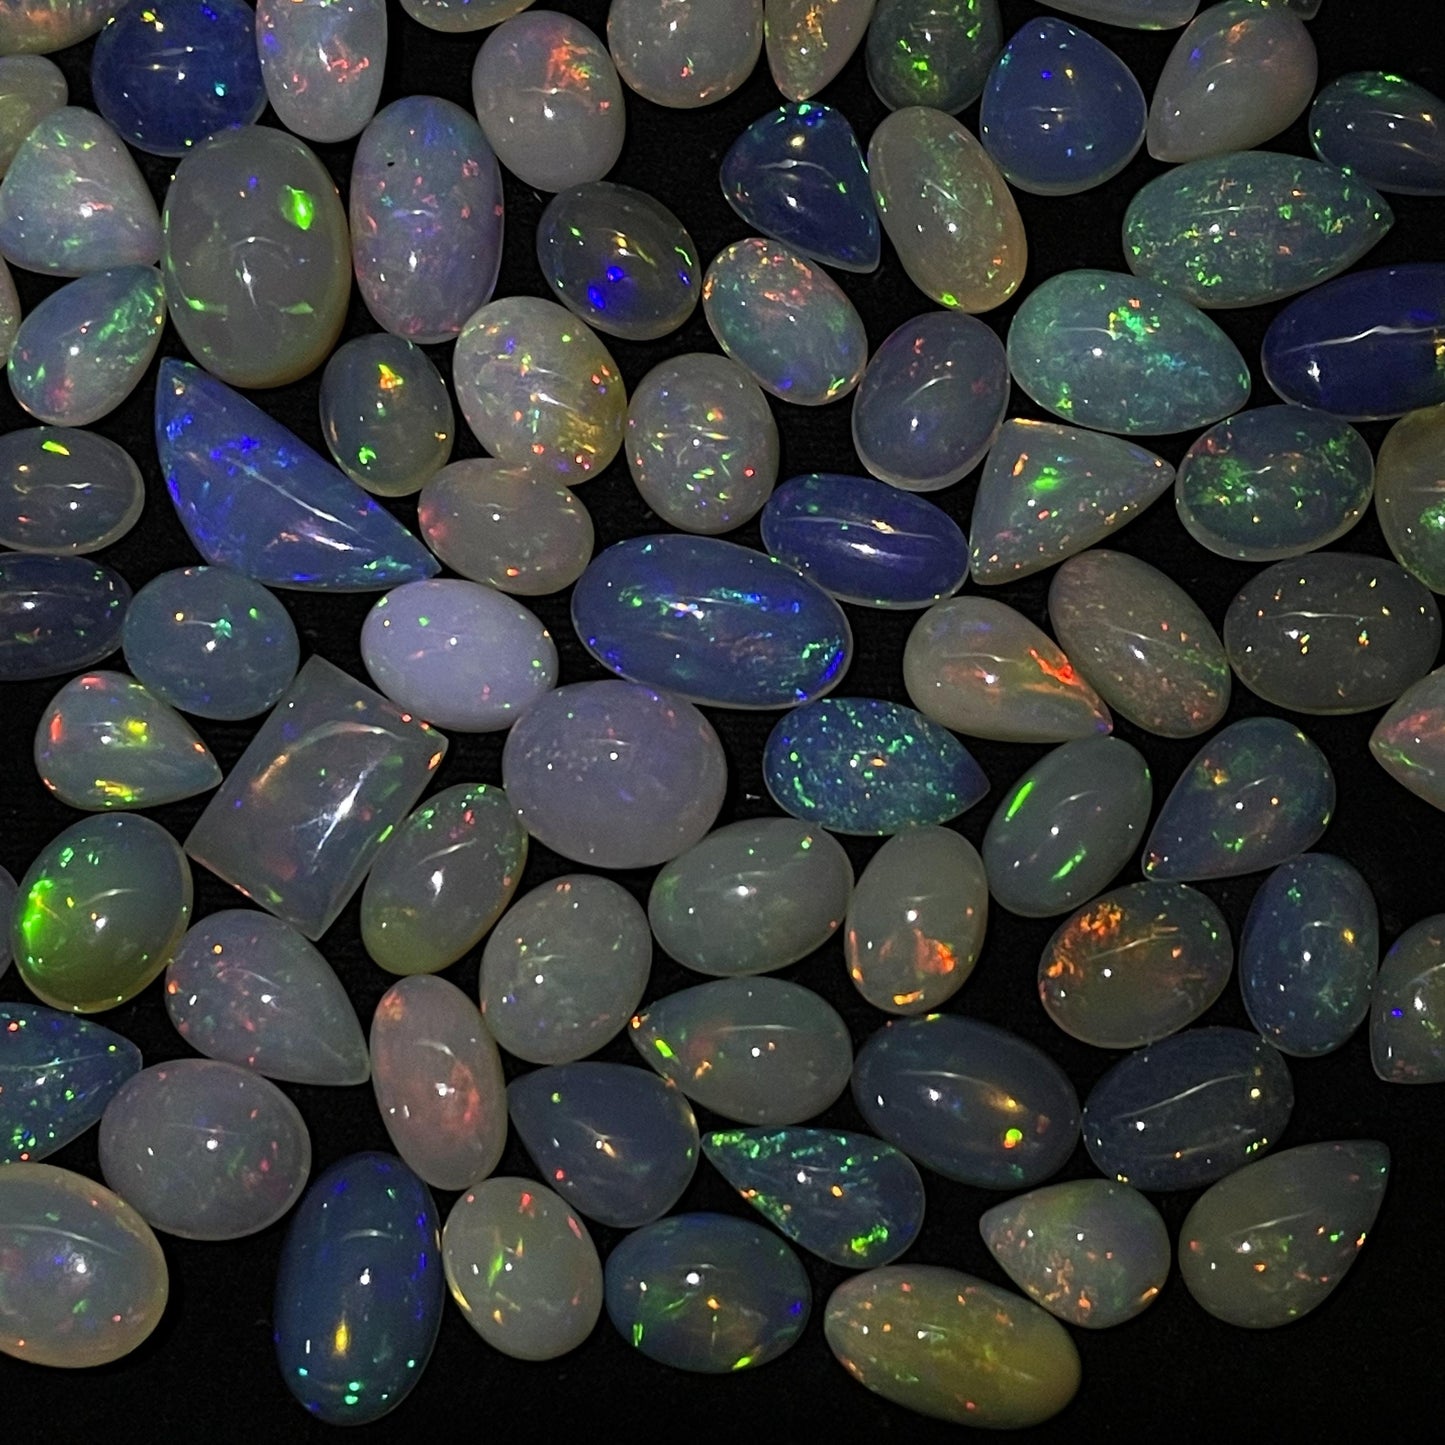 Ethereal Beauty Unveiled: Natural Ethiopian Opal Cabochon - Captivating 5 cts of Exquisite Splendor